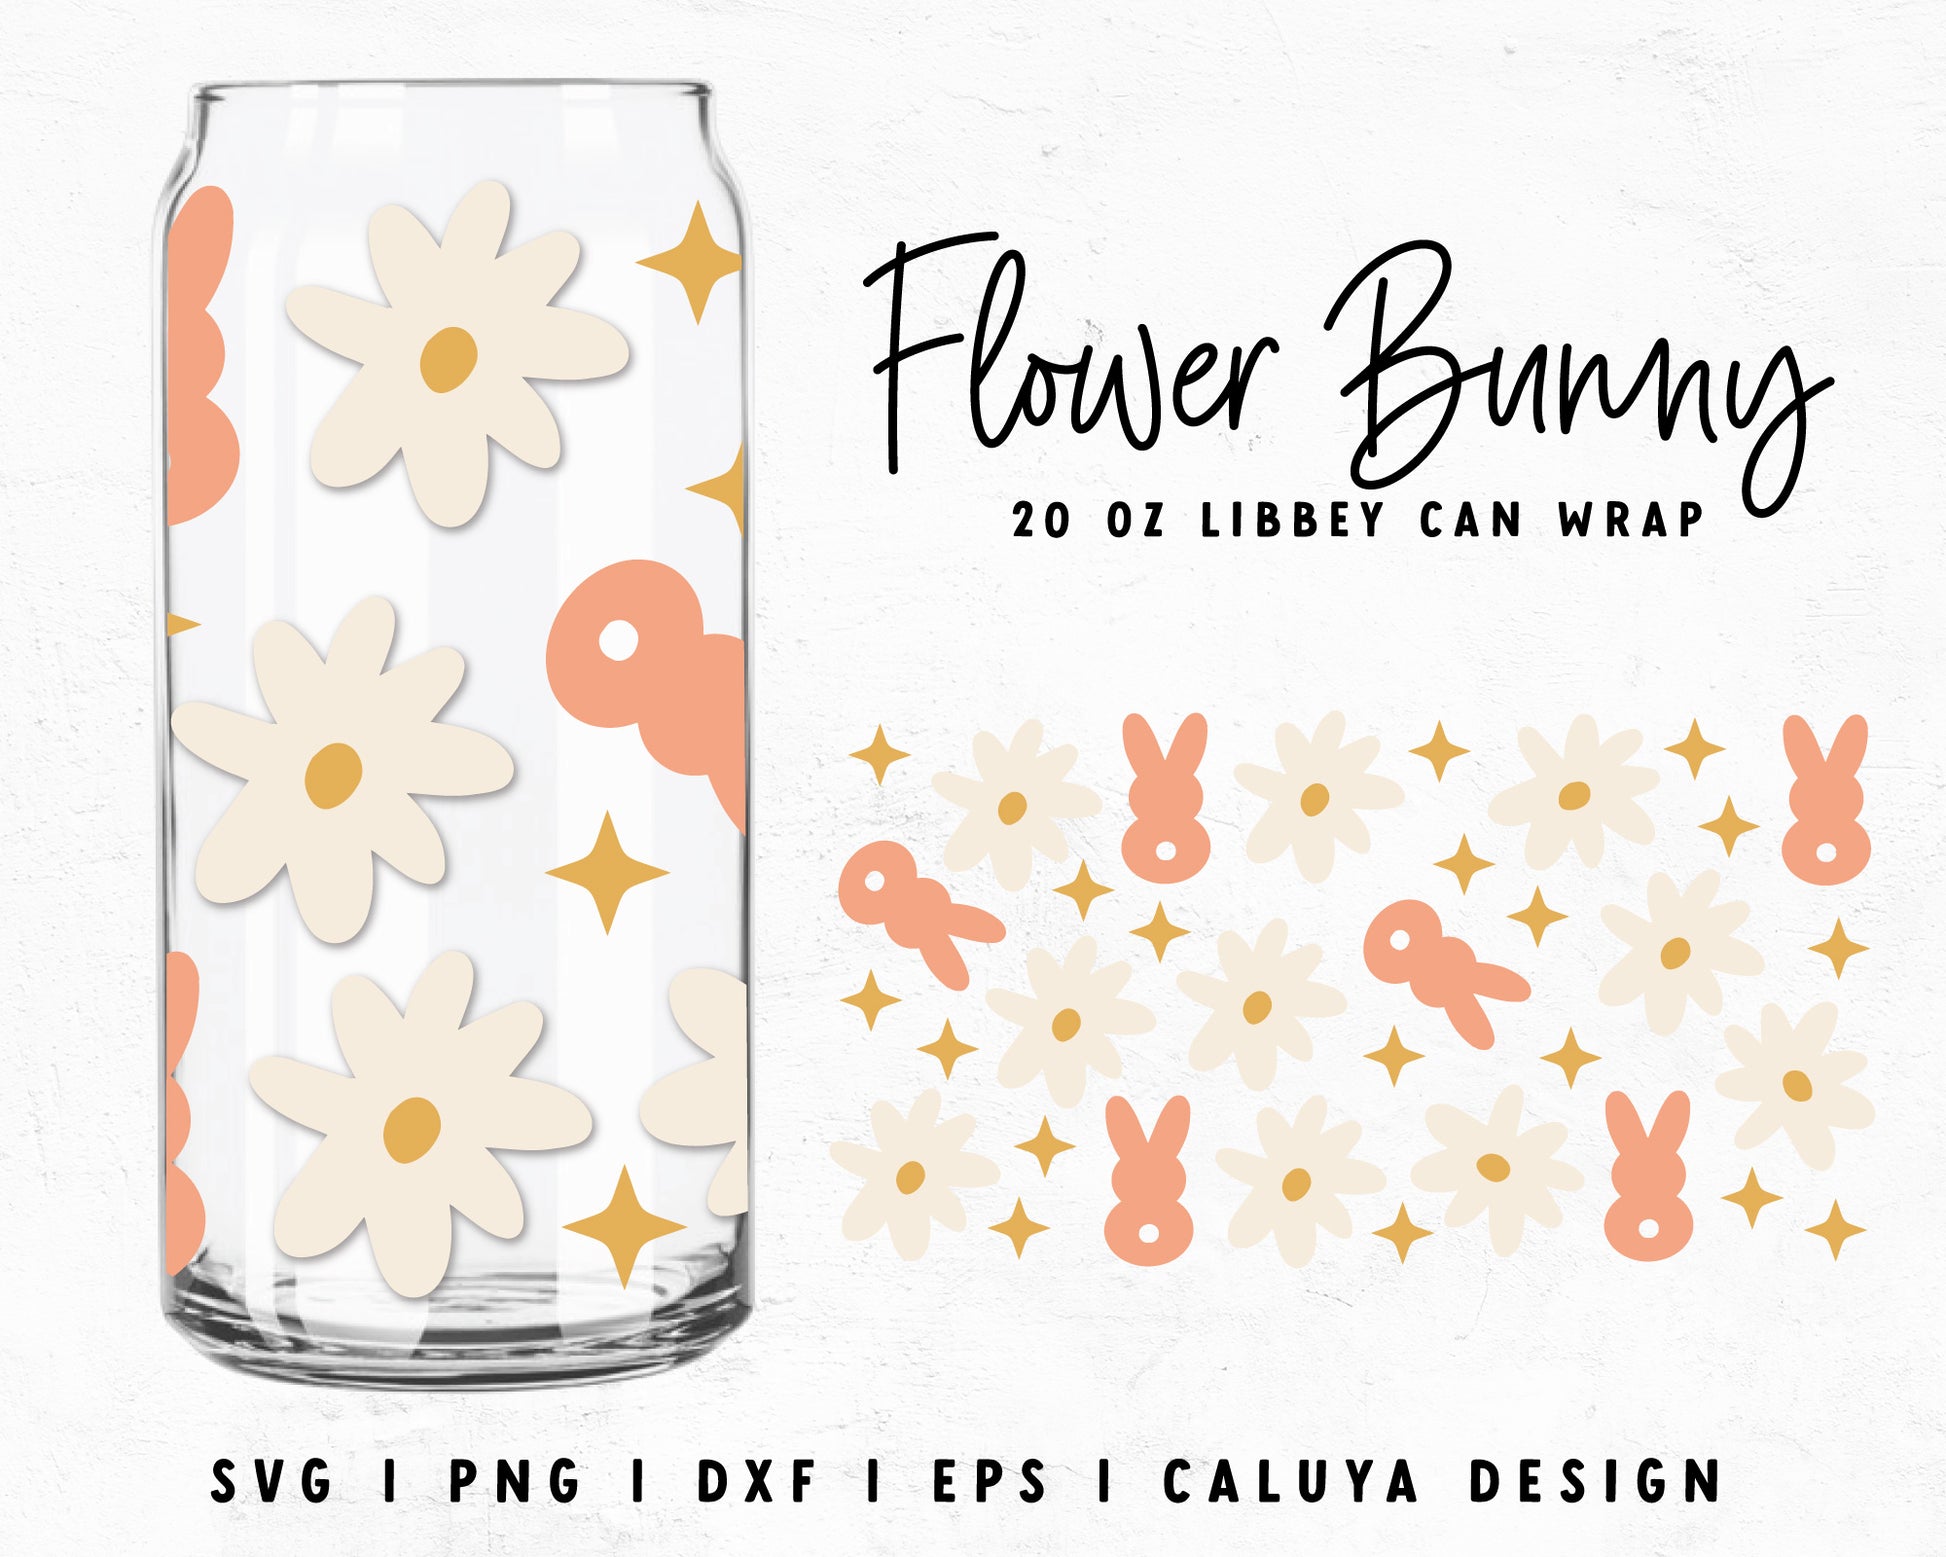 20oz Libbey Can Flower & Easter Bunny Cup Wrap Cut File for Cricut, Cameo Silhouette | Free SVG Cut File